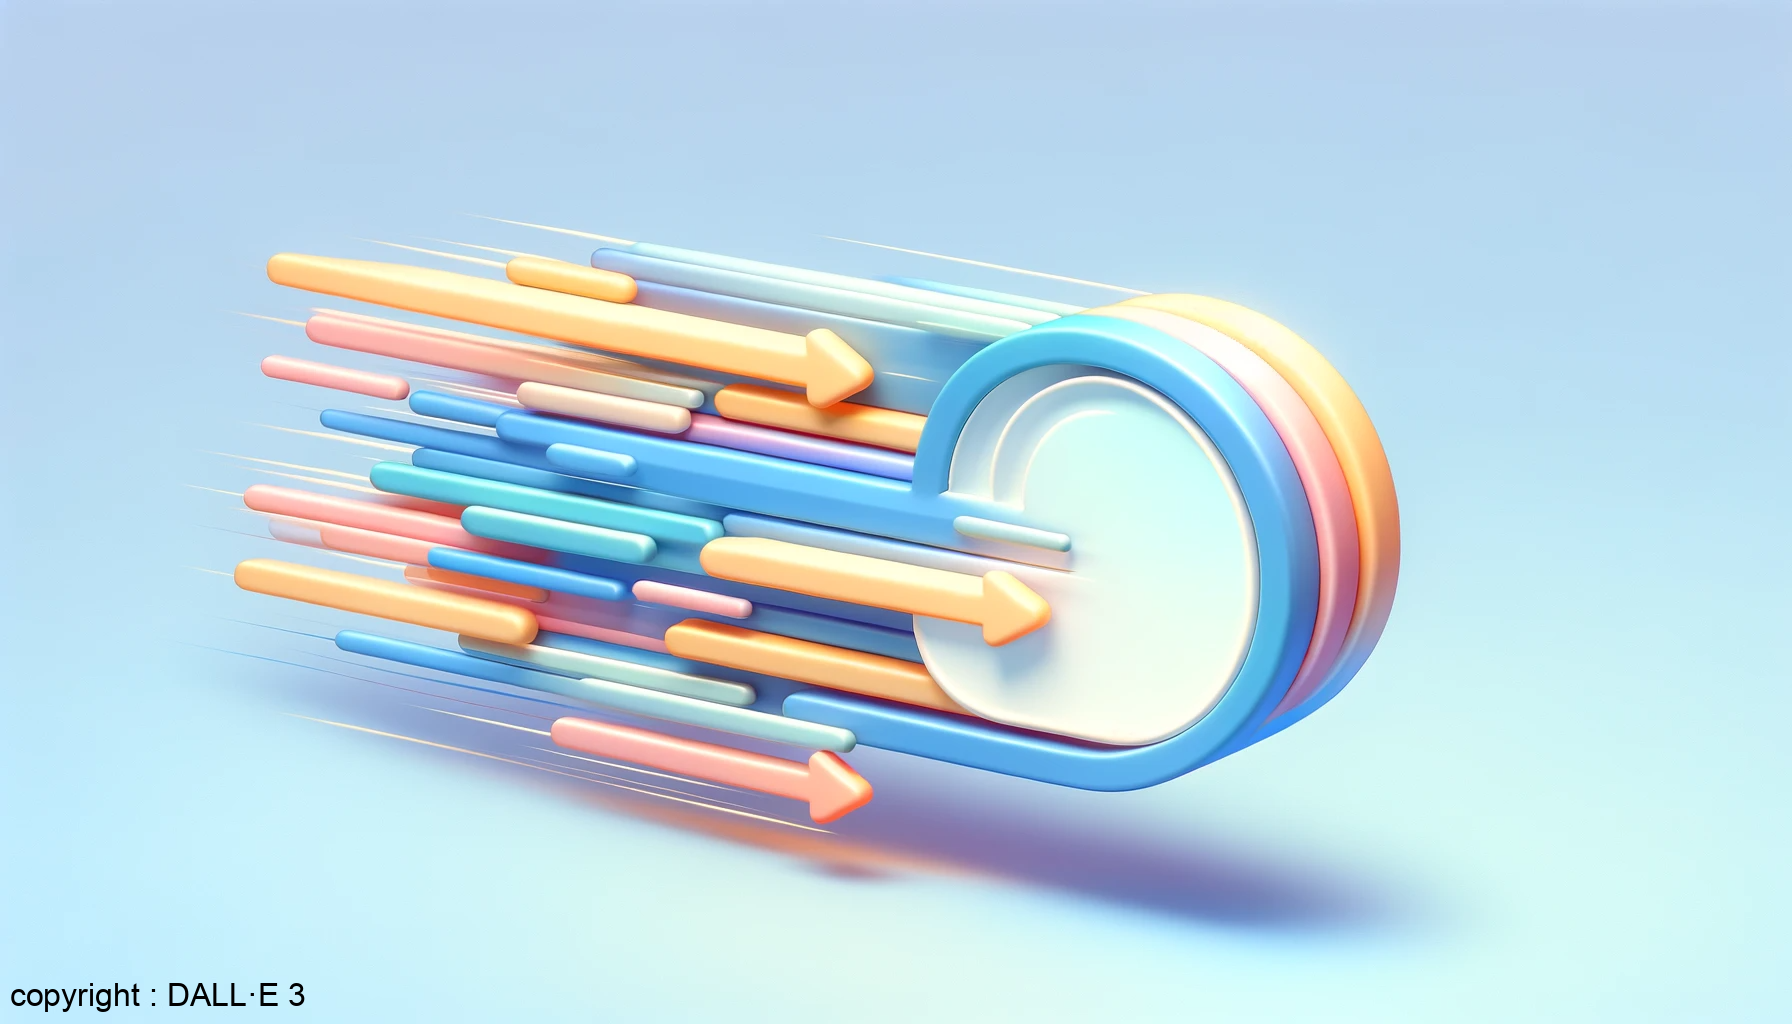 speed-related-to-server-side-rendering-depicted-as-a-minimalist-swift-flowing-motion-or-a-light-trail-in-pastel-tones.png